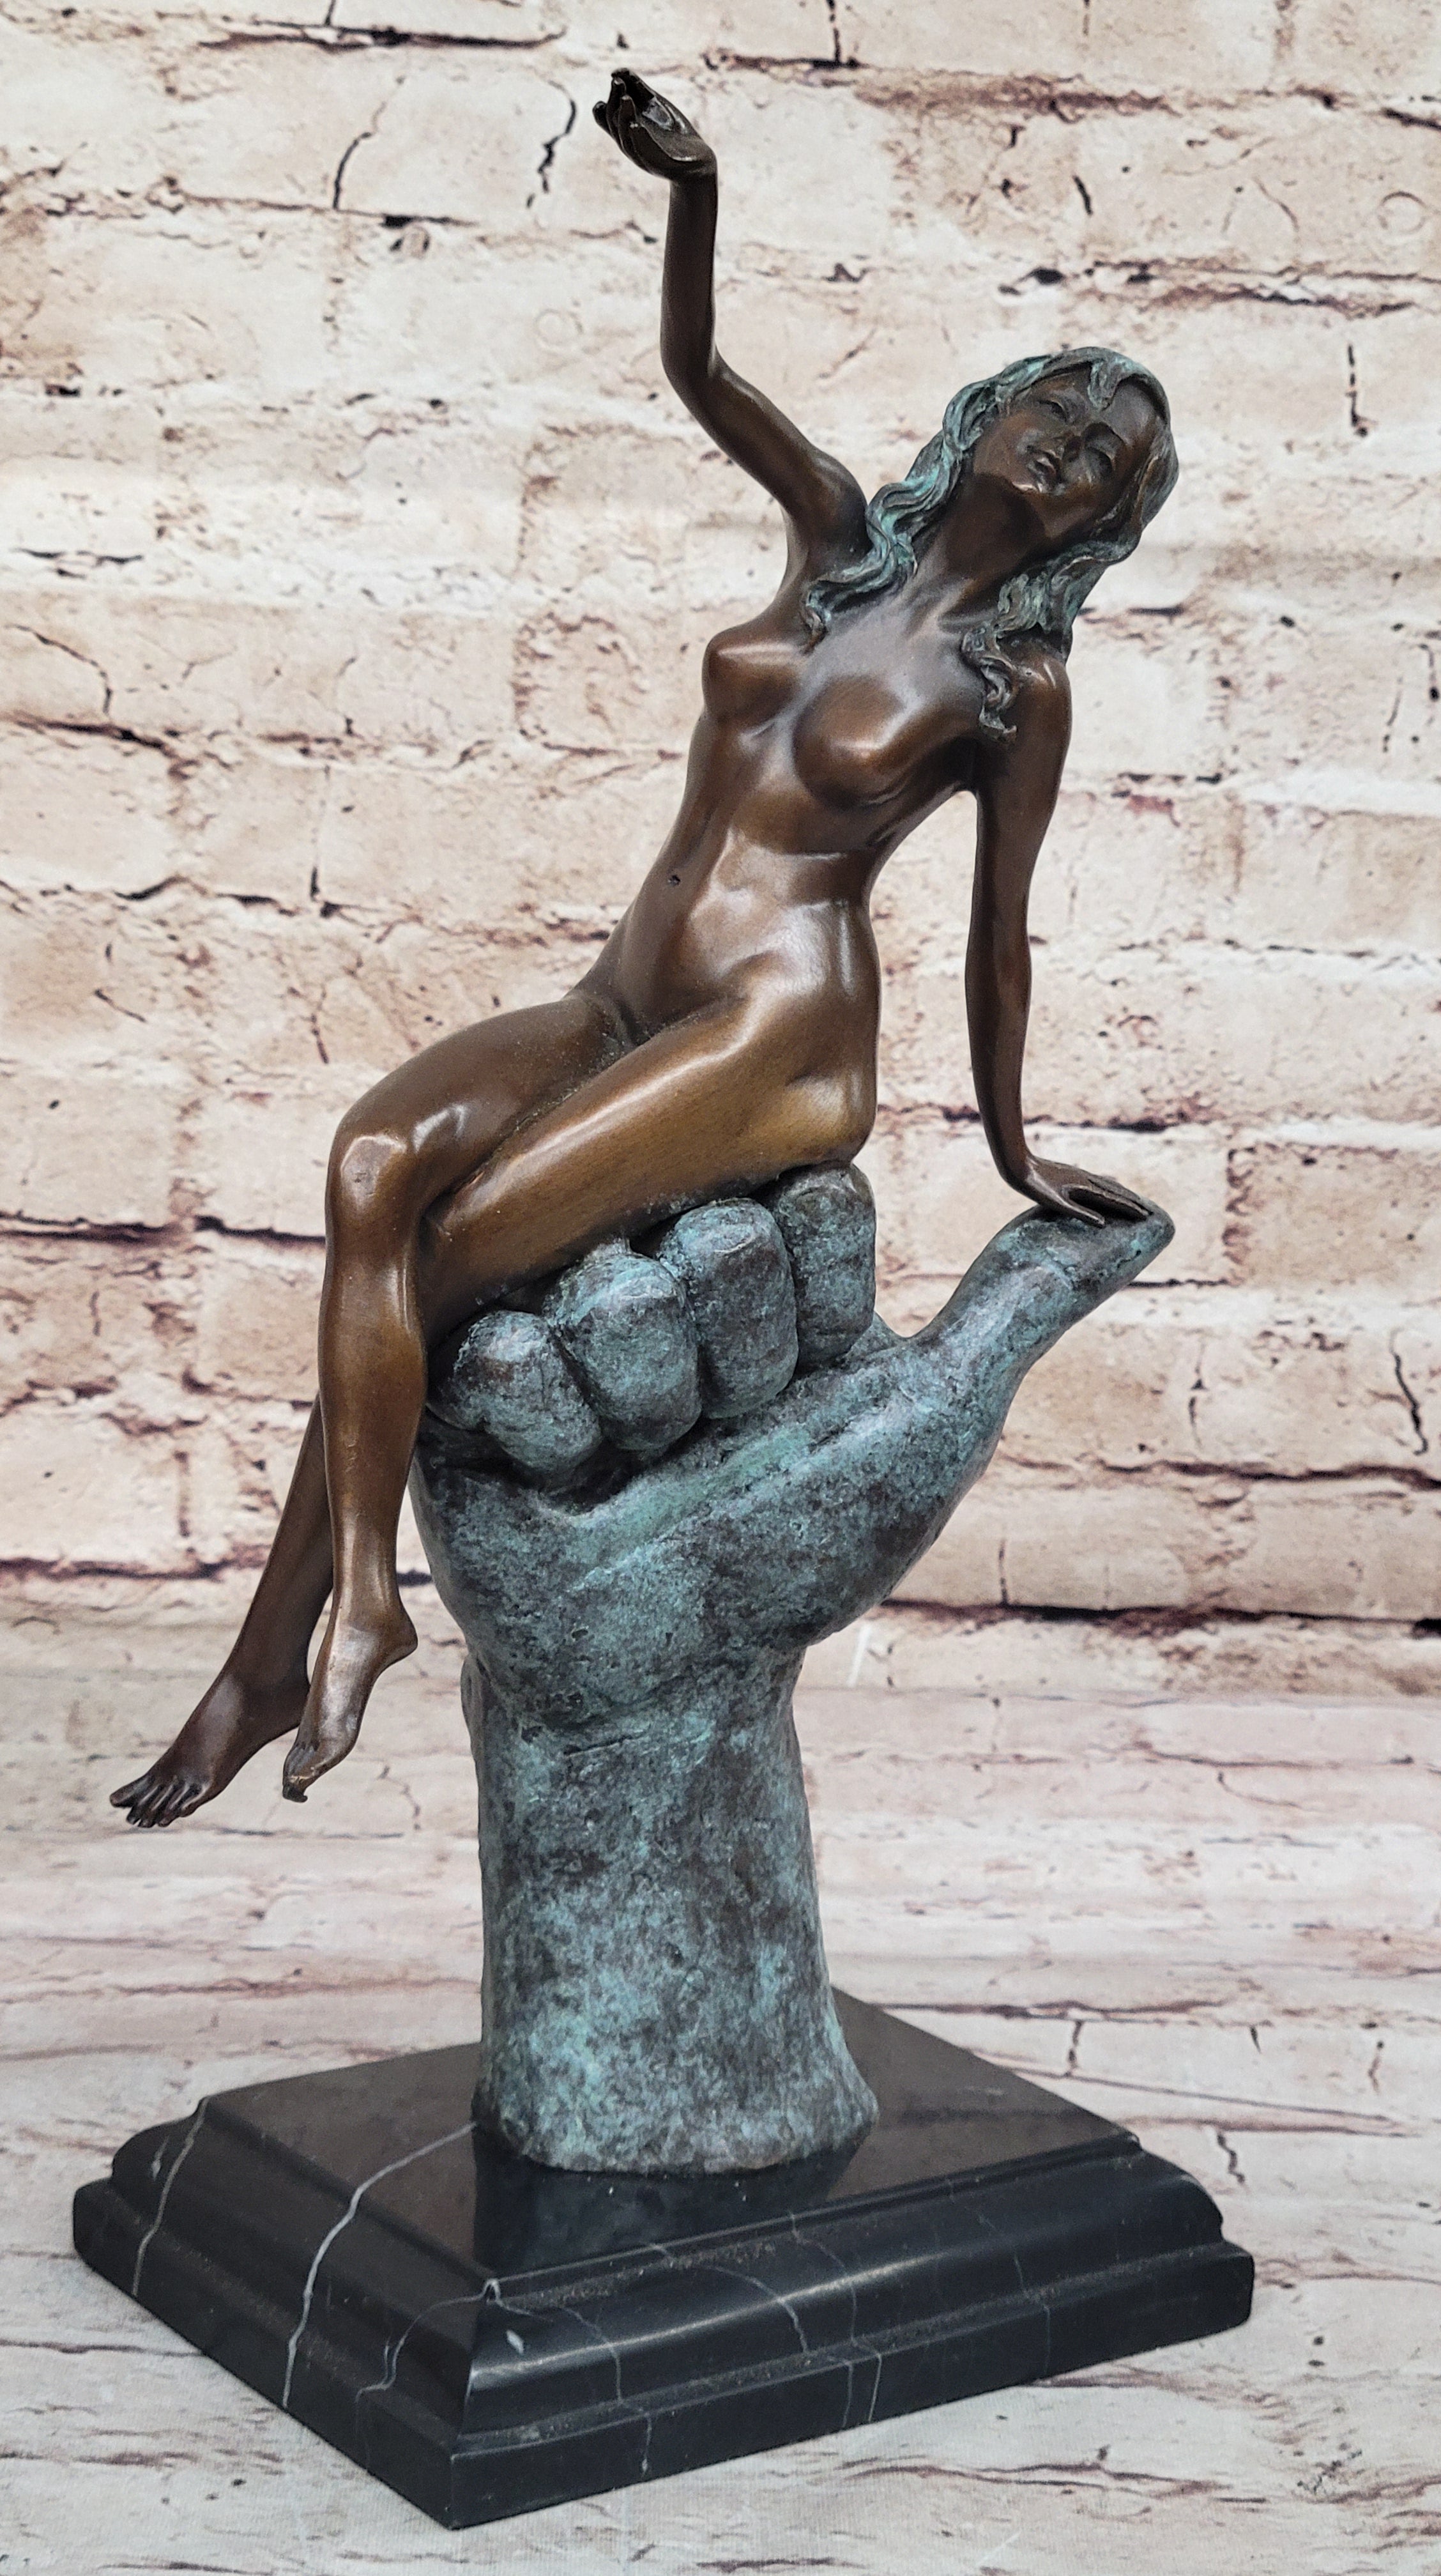 Bronze Figure of a Naked Lady Sitting on a Mans Hand by Juno Original Art Figure